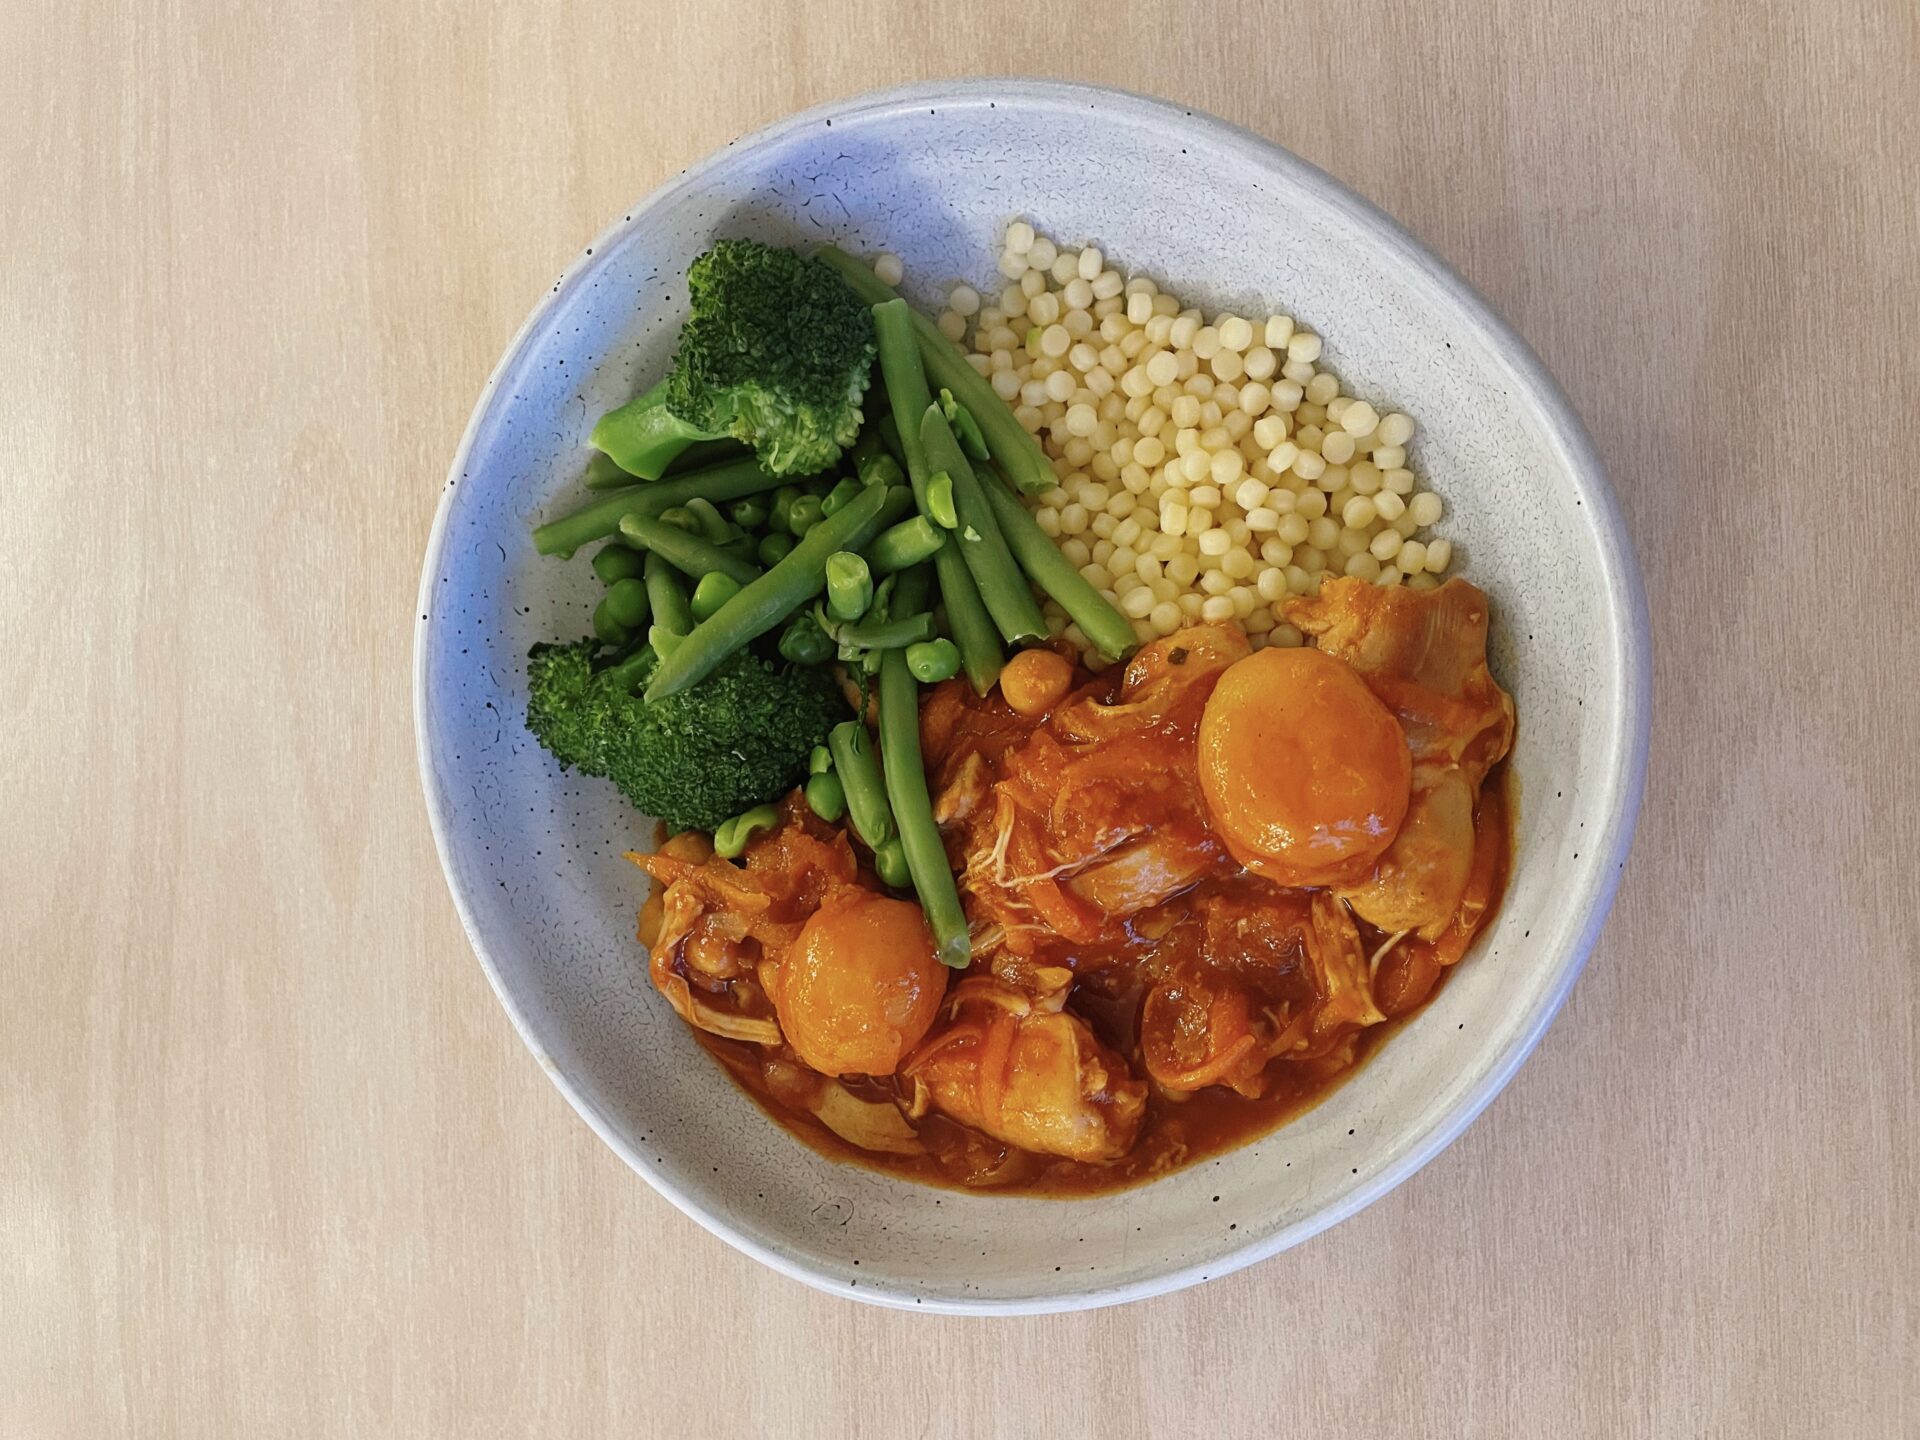 Slow Cooker Moroccan Apricot Chicken with Couscous and steamed greens